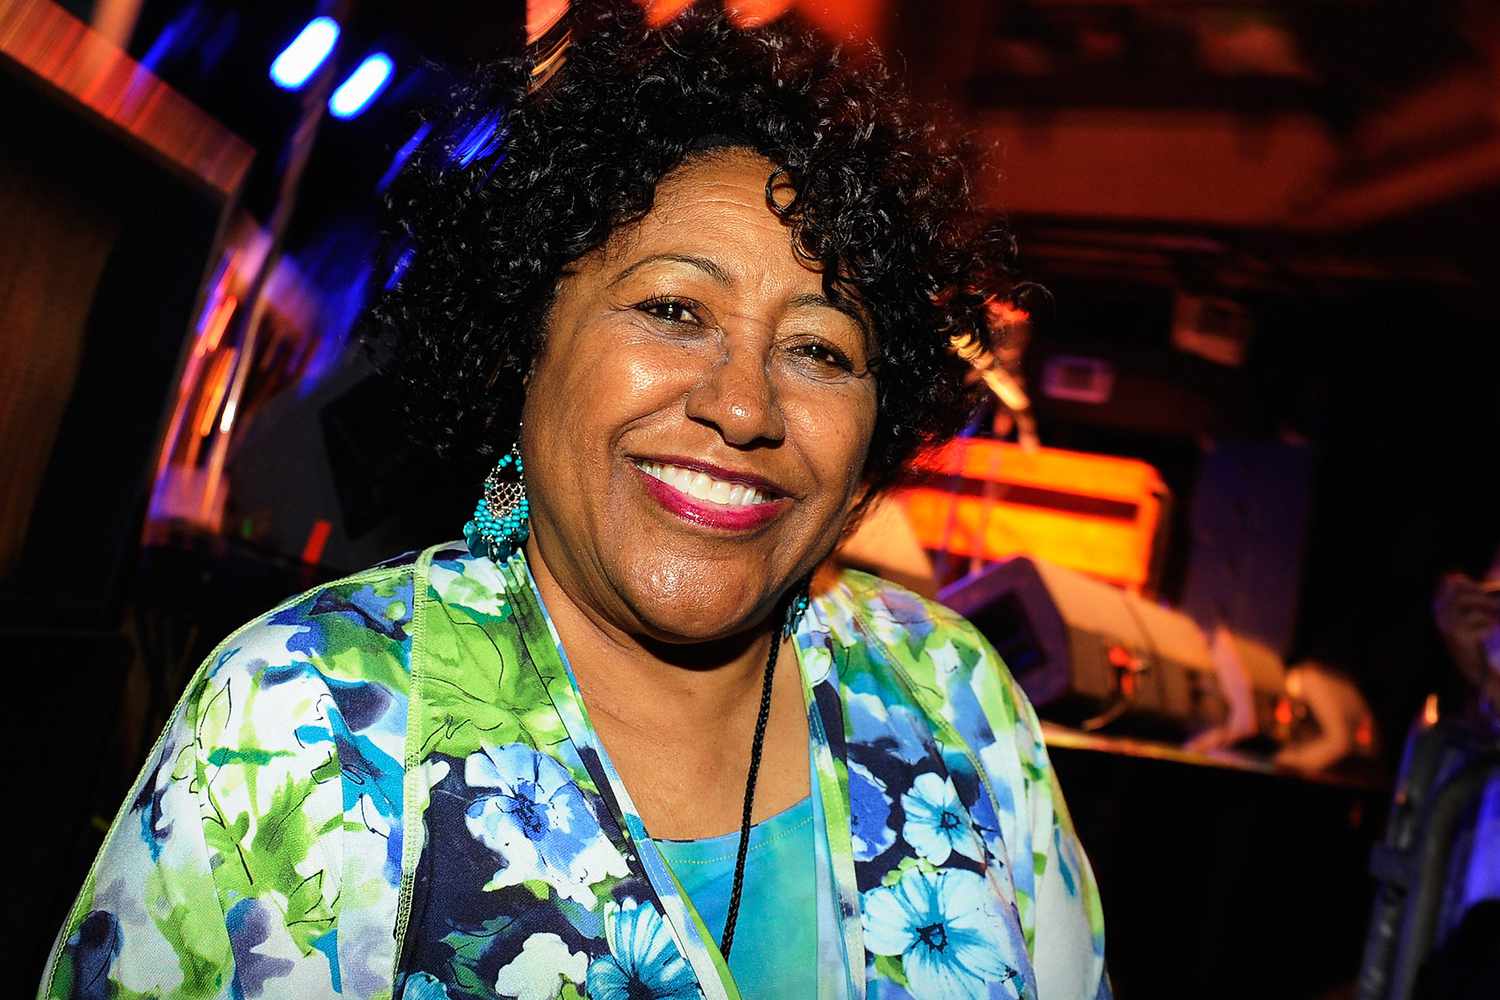 Jean Knight (Mr. Big Stuff) backstage as part of Tipitina's Foundation's 11th Annual Instruments A Comin'on April 30, 2012 in New Orleans, Louisiana.